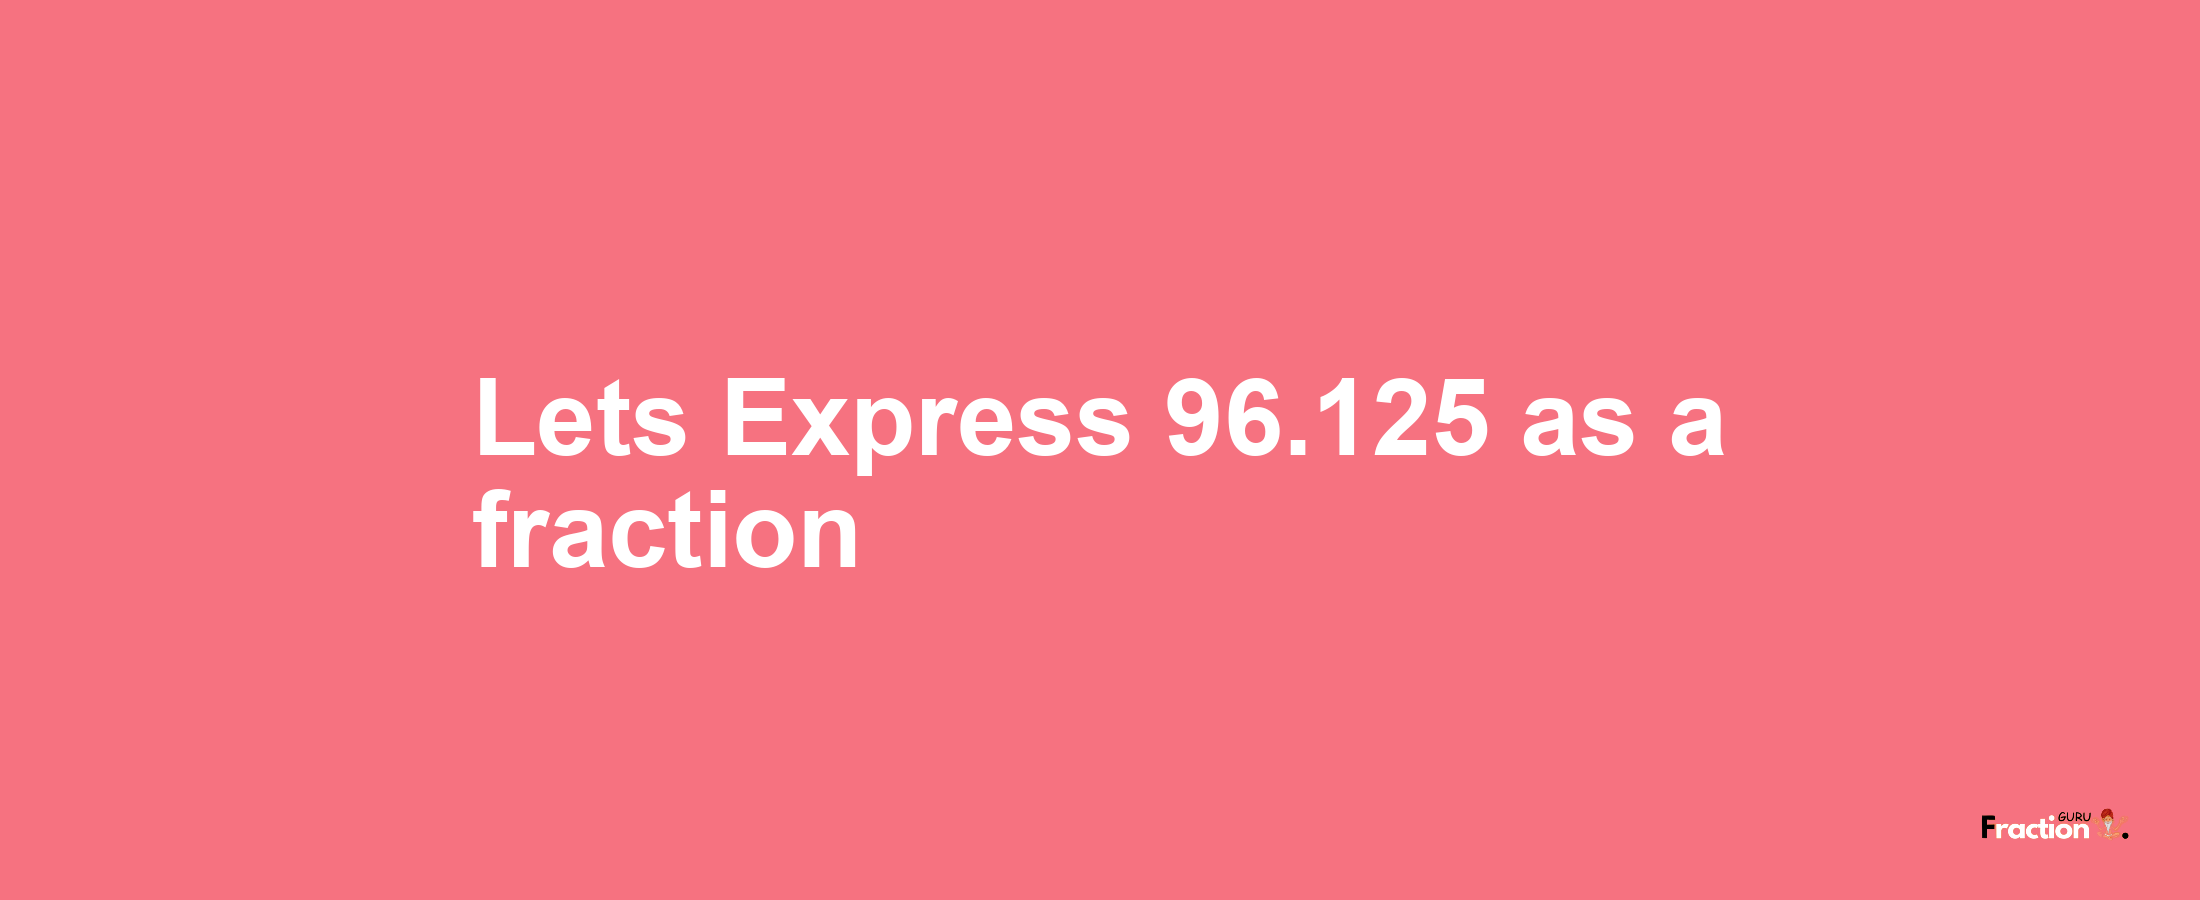 Lets Express 96.125 as afraction